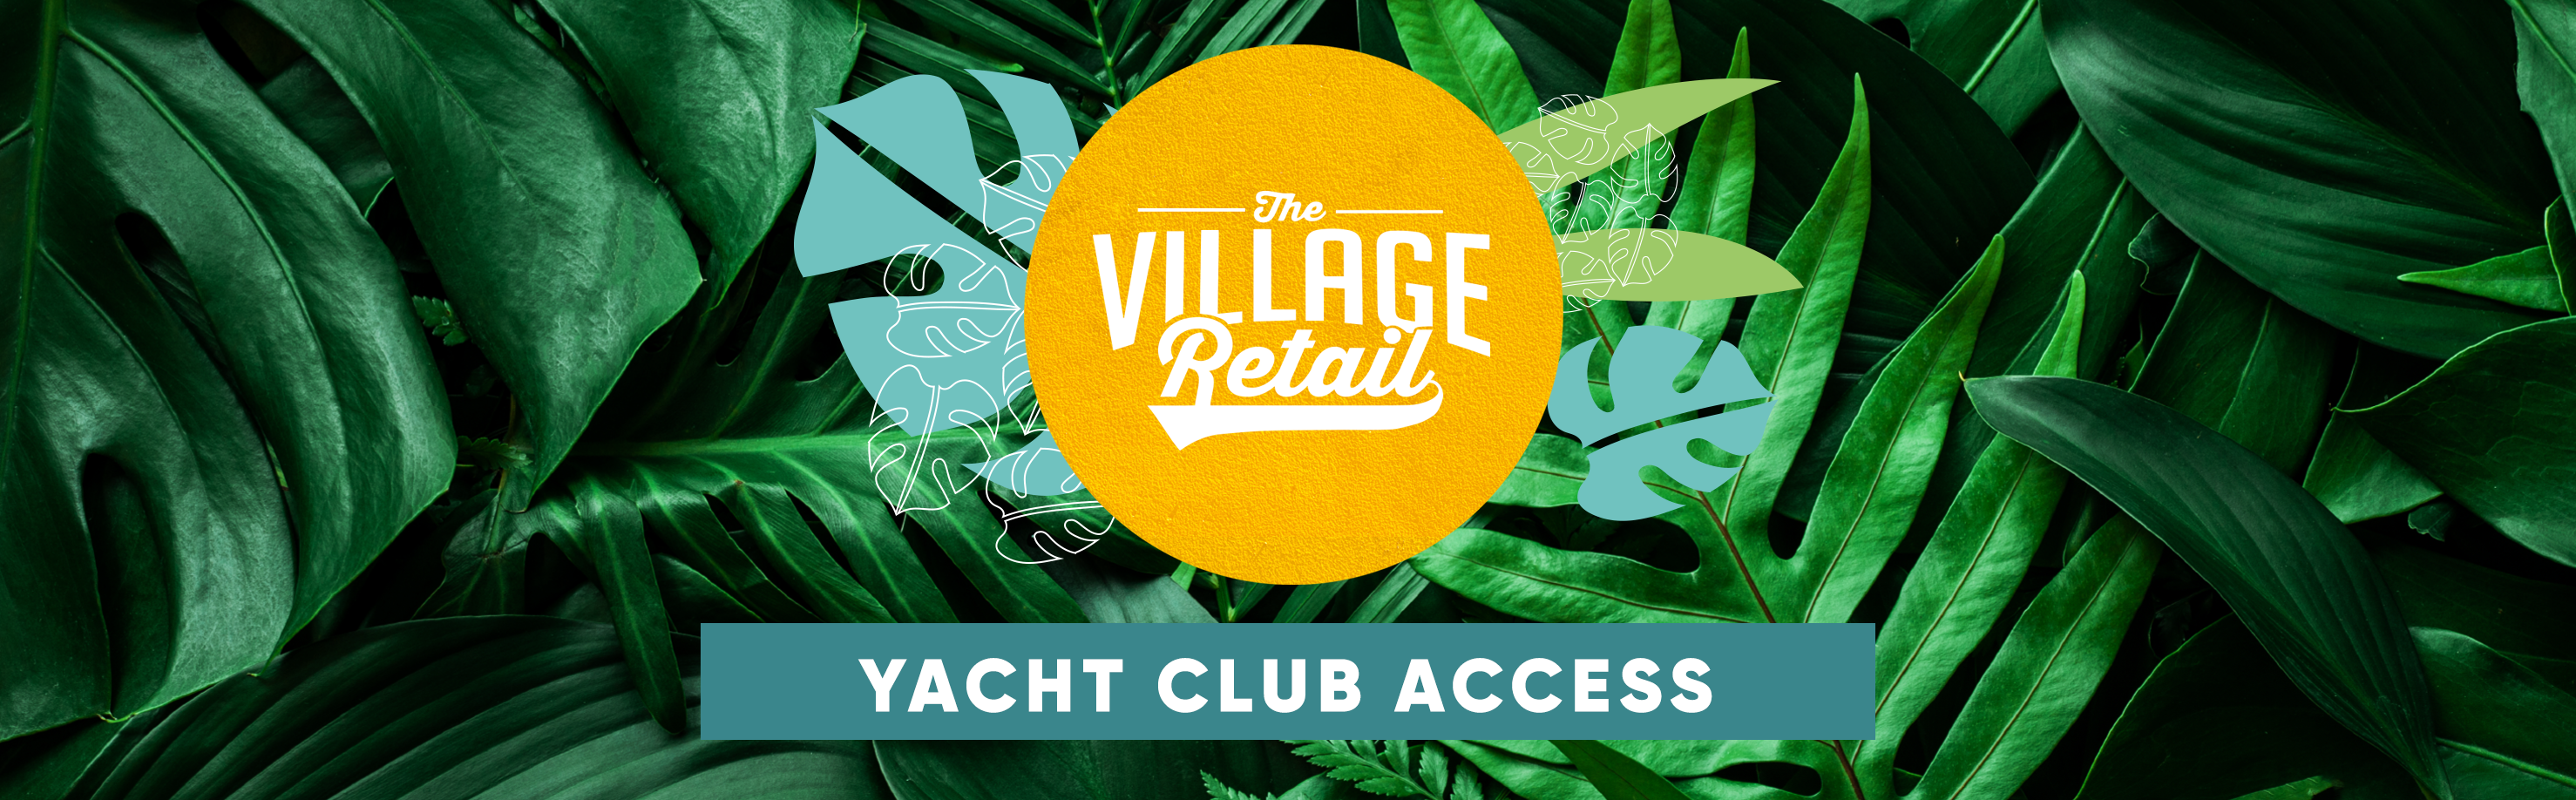 Brand Page Header_Select-Yacht Club Access.png__PID:0fda6888-7a06-4af6-b424-787644bcf6a7